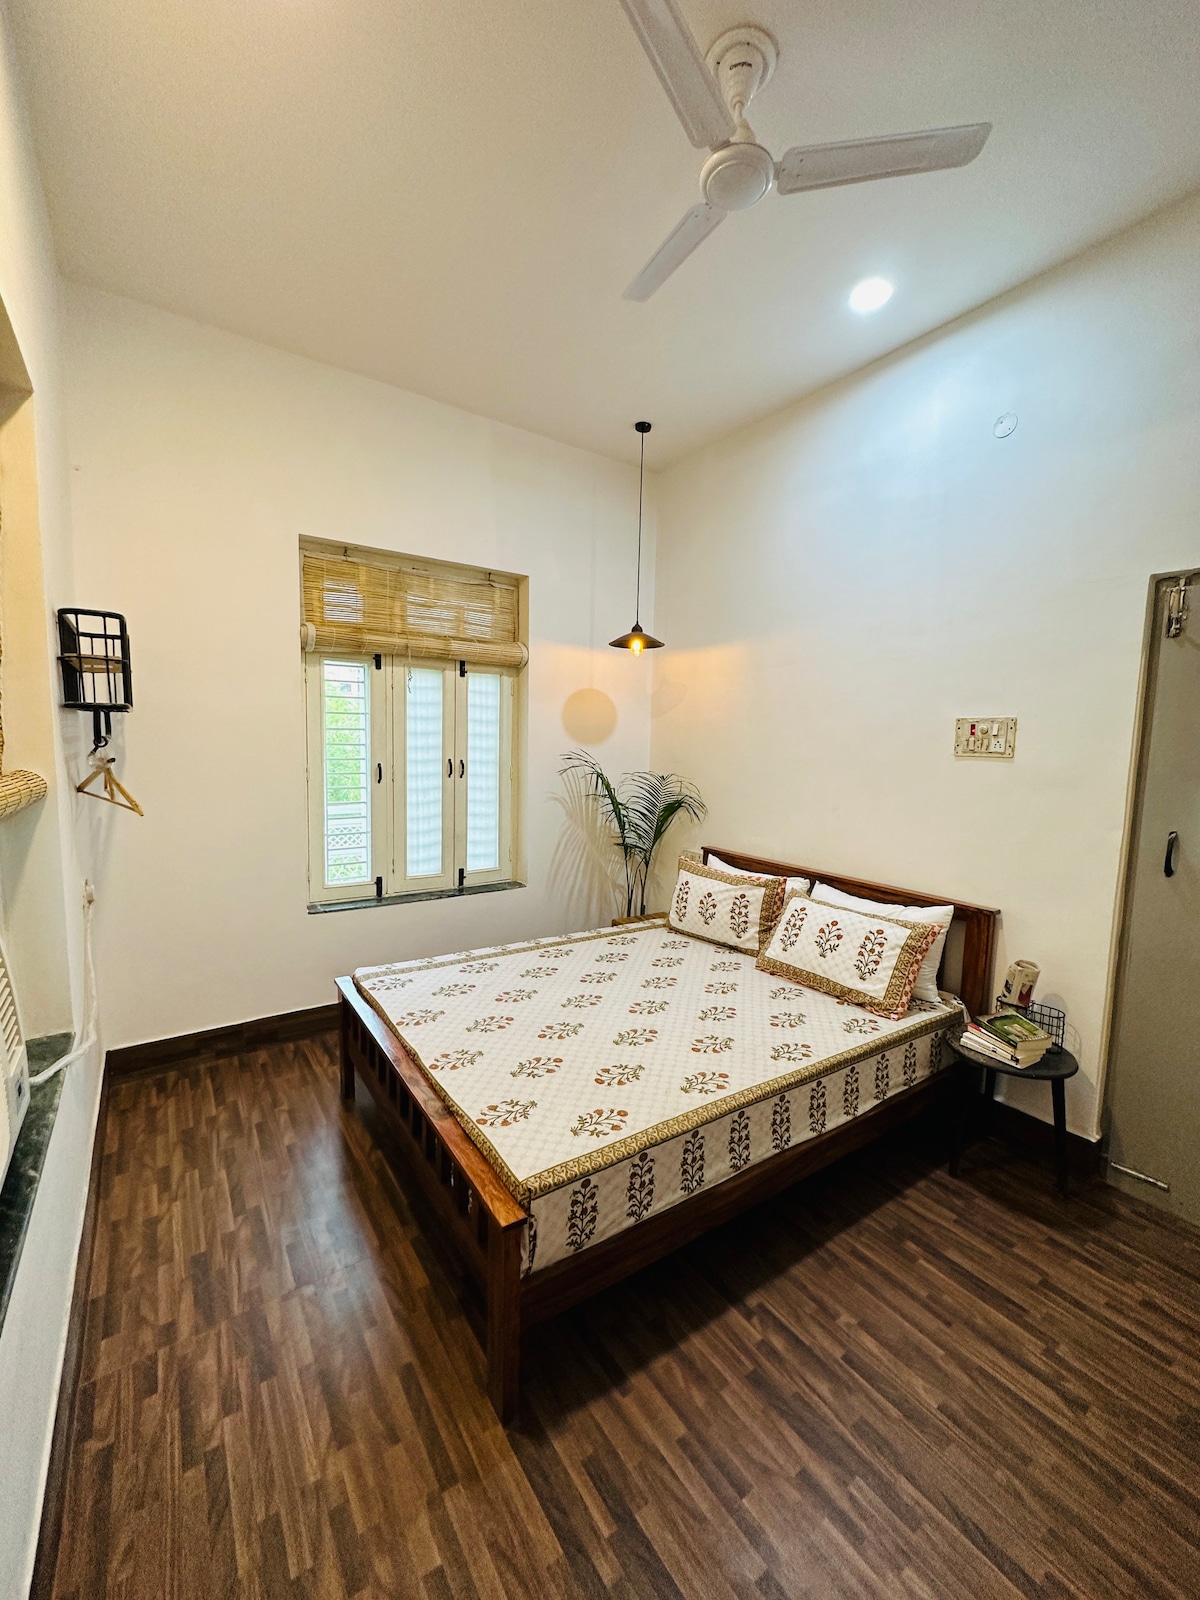 Spacious Luxury 1bhk in *City Center* Gwalior!